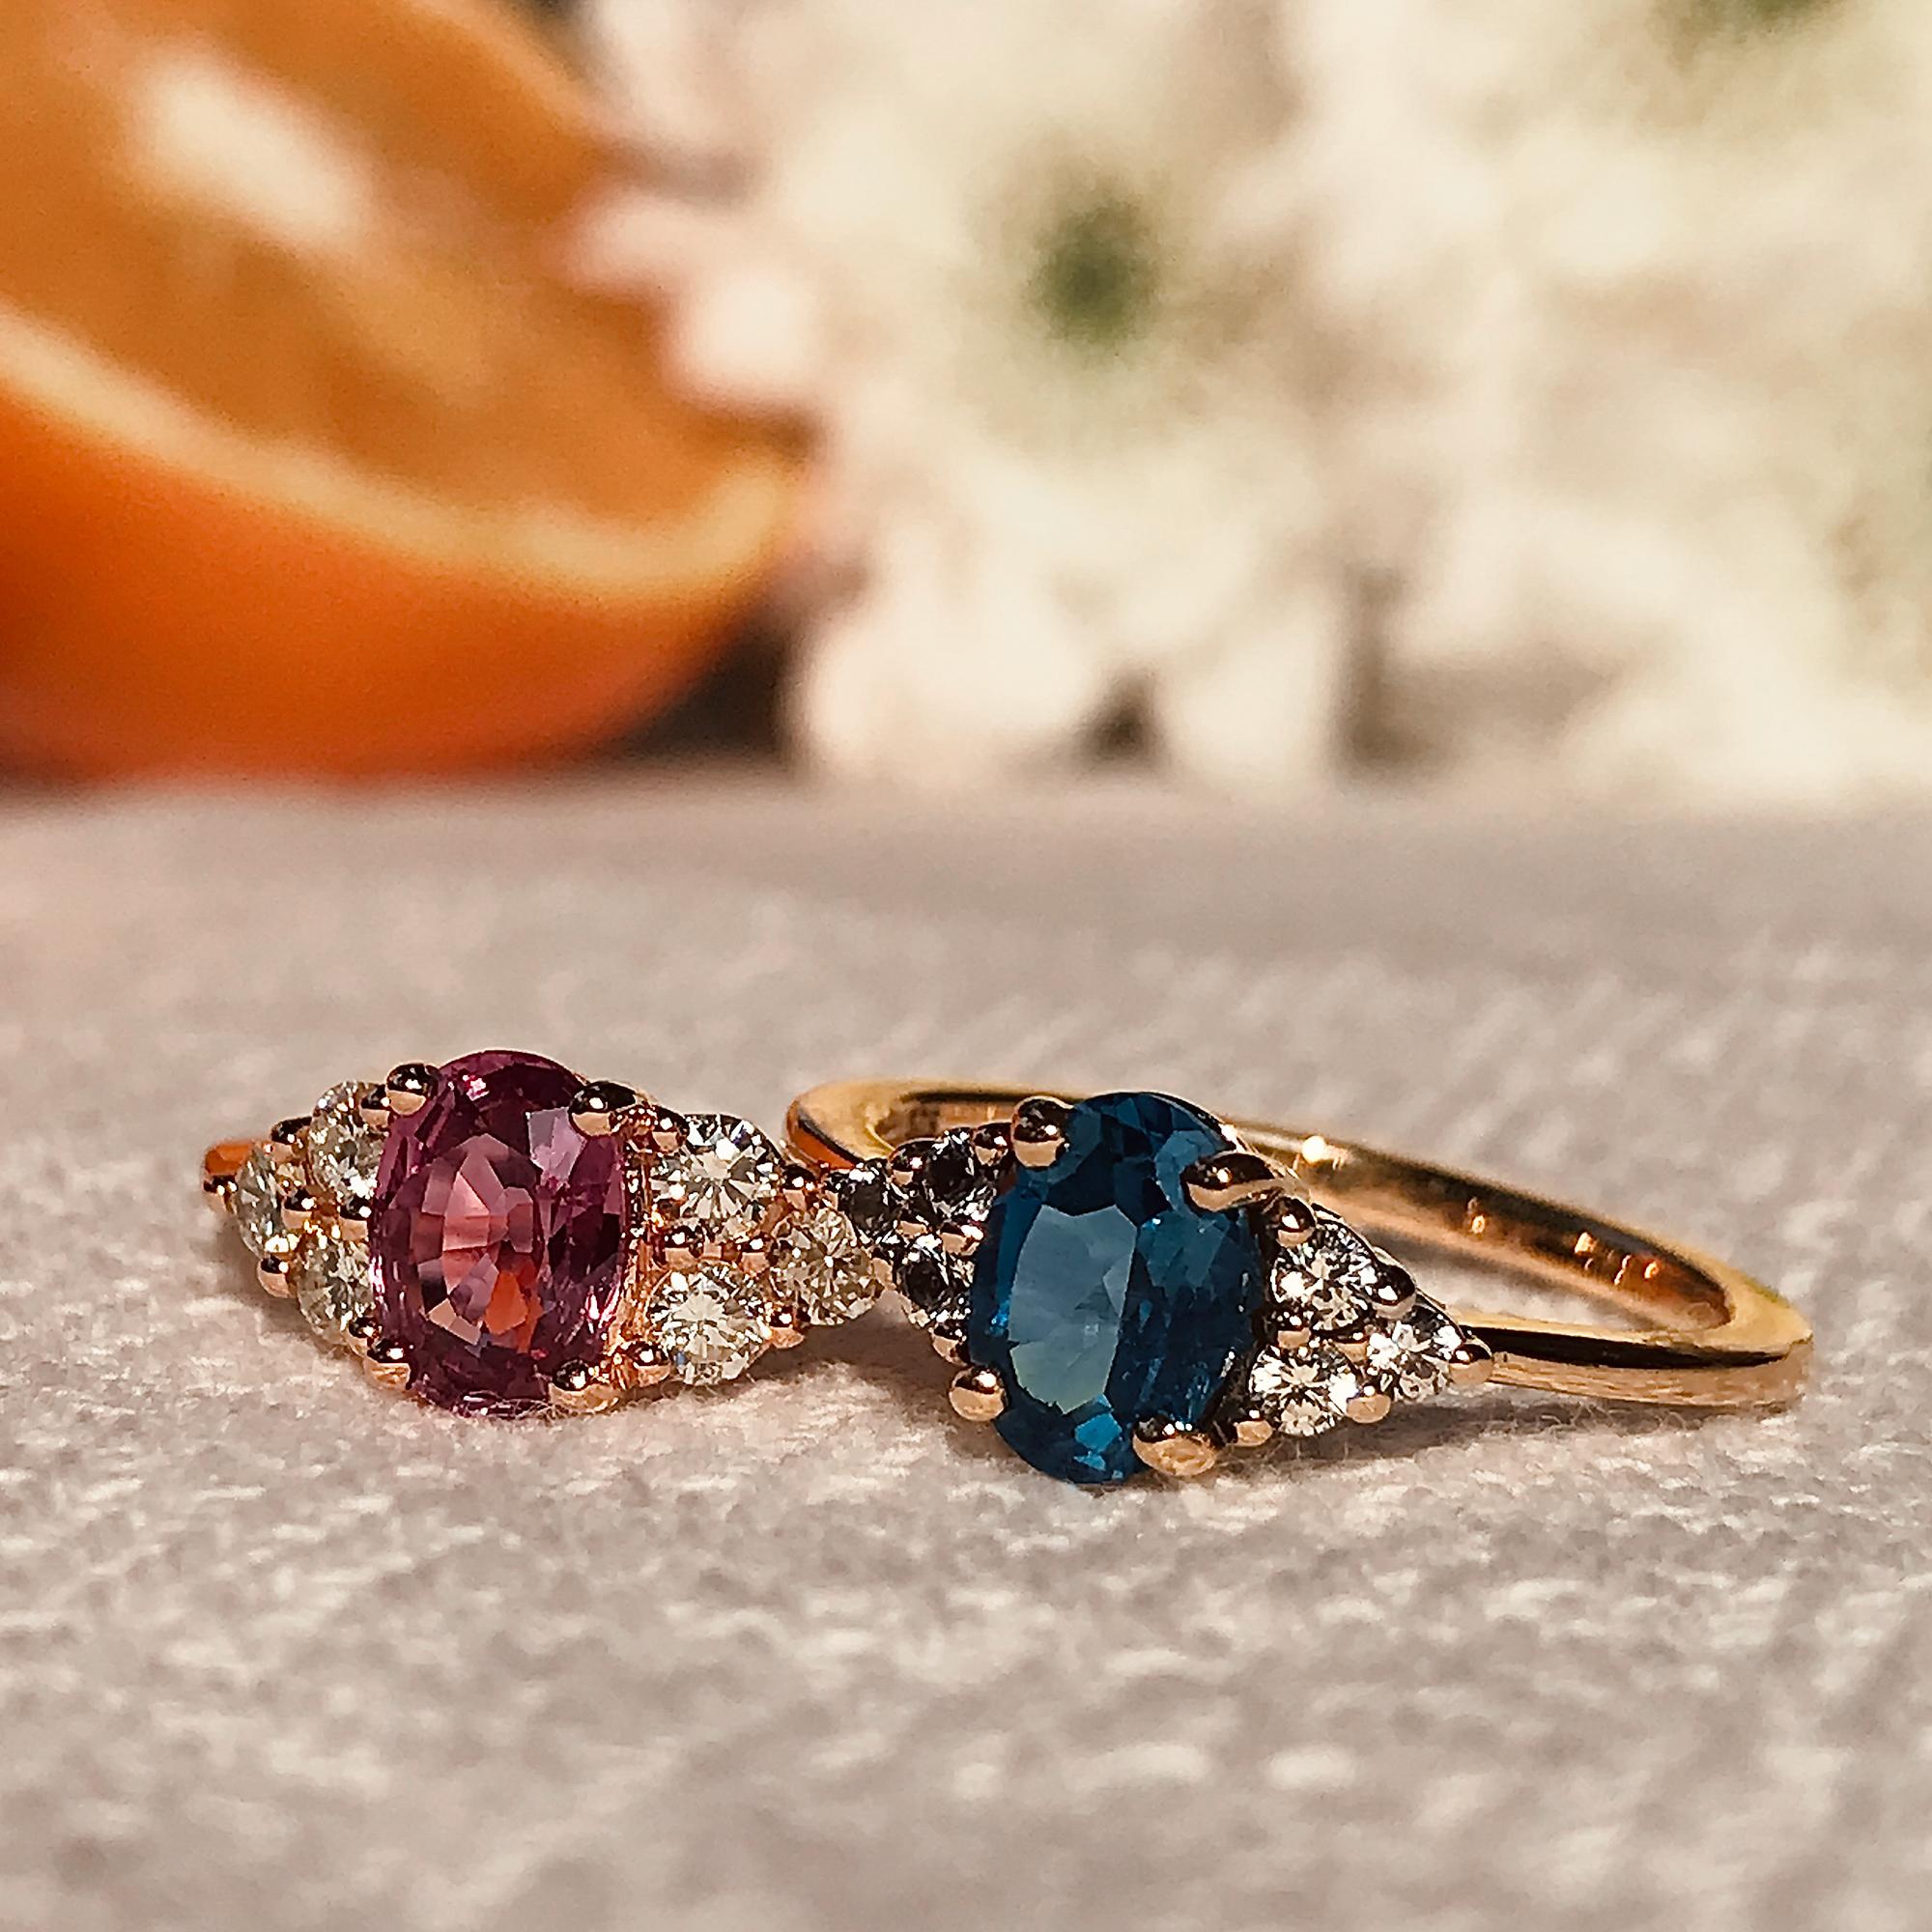 A London blue topaz and white sapphire ring, handmade from 9k yellow gold. The center stone is flanked by 3 white sapphires on each sides, all set in prong setting. A lovely piece that you can wear every day. 

Ring Information
Style: Vintage
Metal: